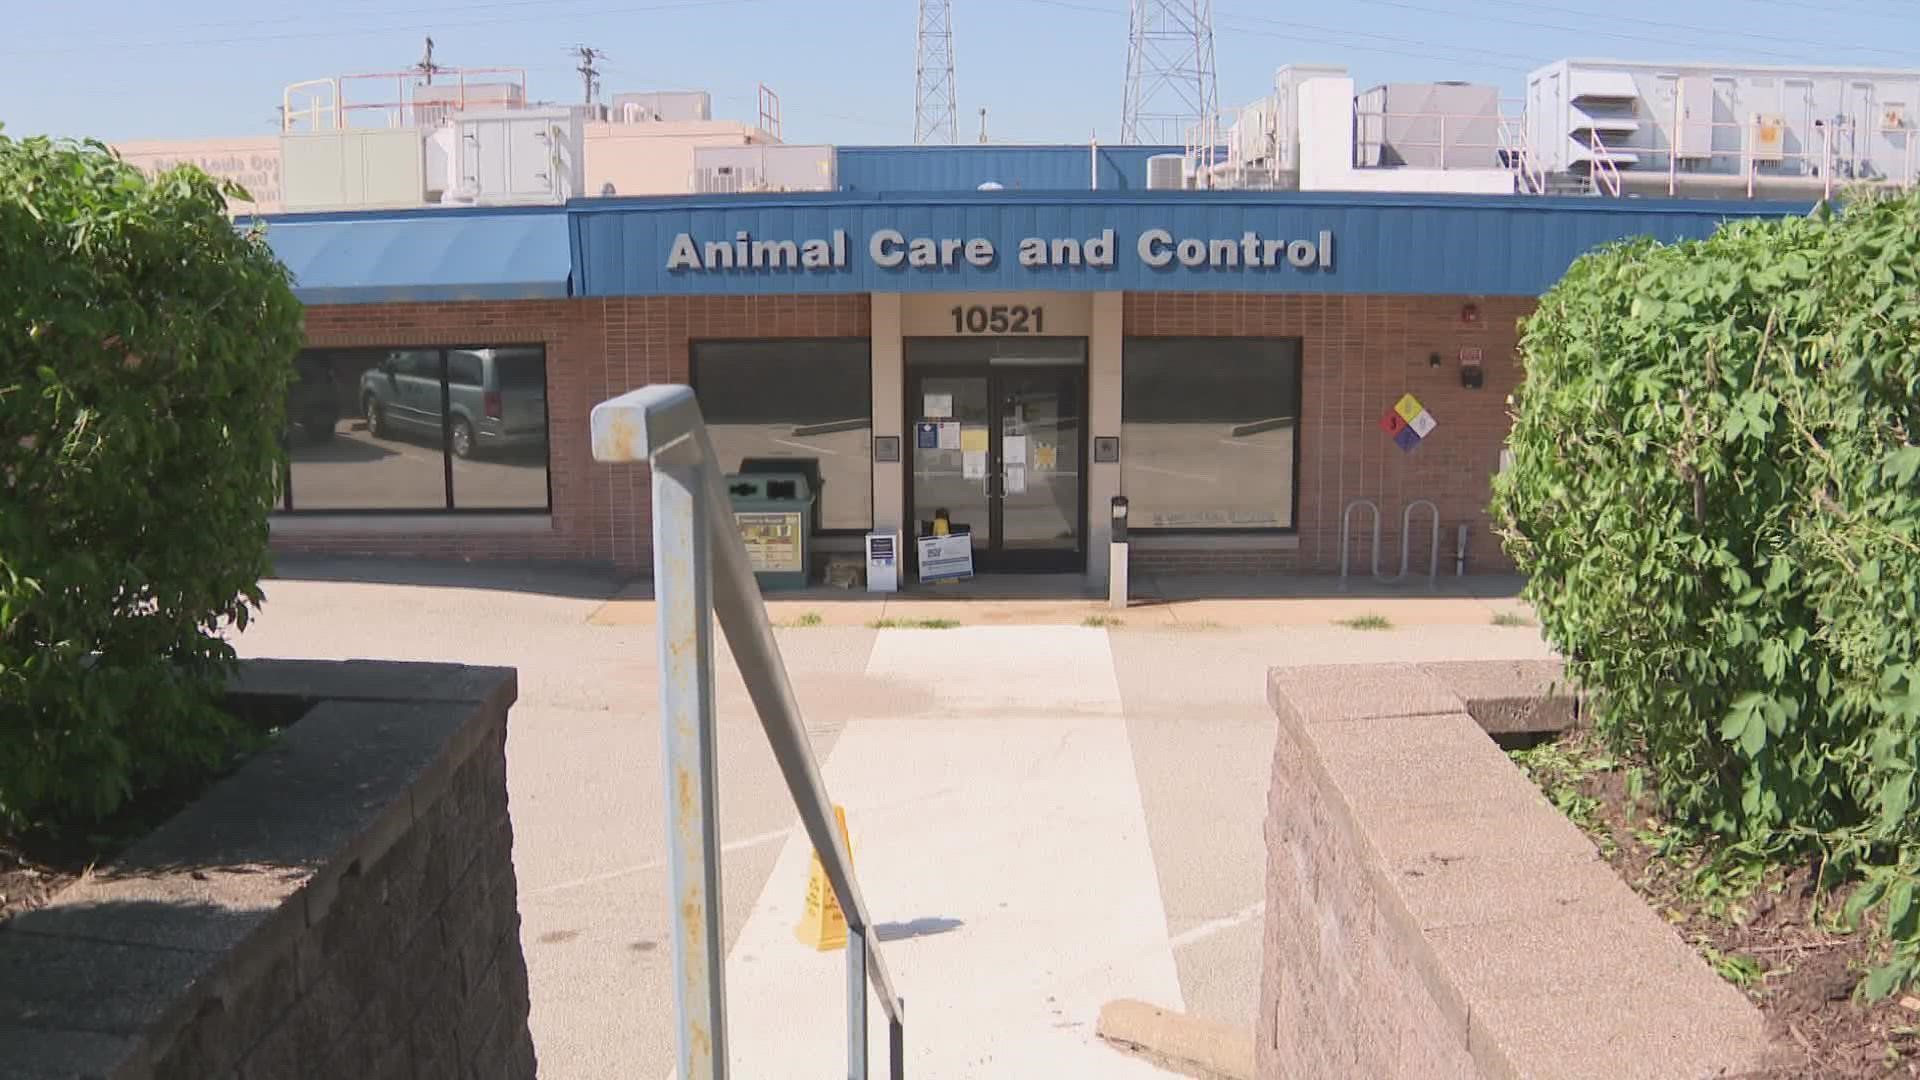 The County animal shelter is faced with little resources and management. A non-profit is trying to help an agency during hardship.